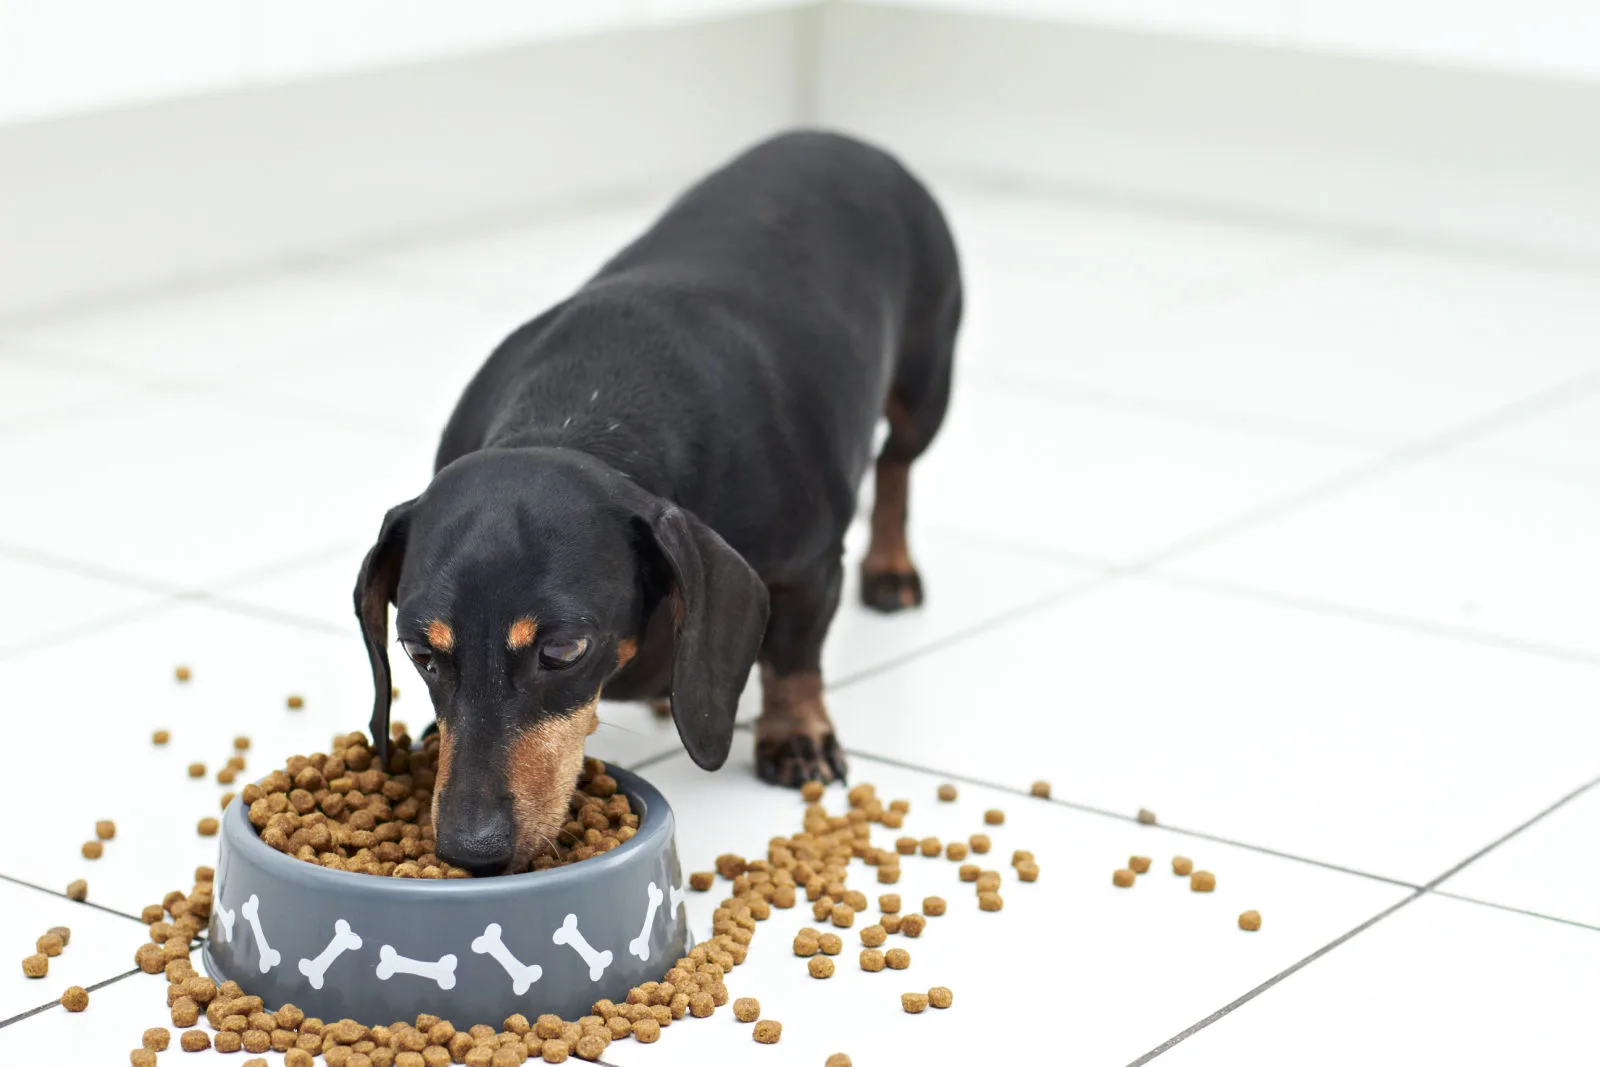 dachshund eating dog food from a bowl